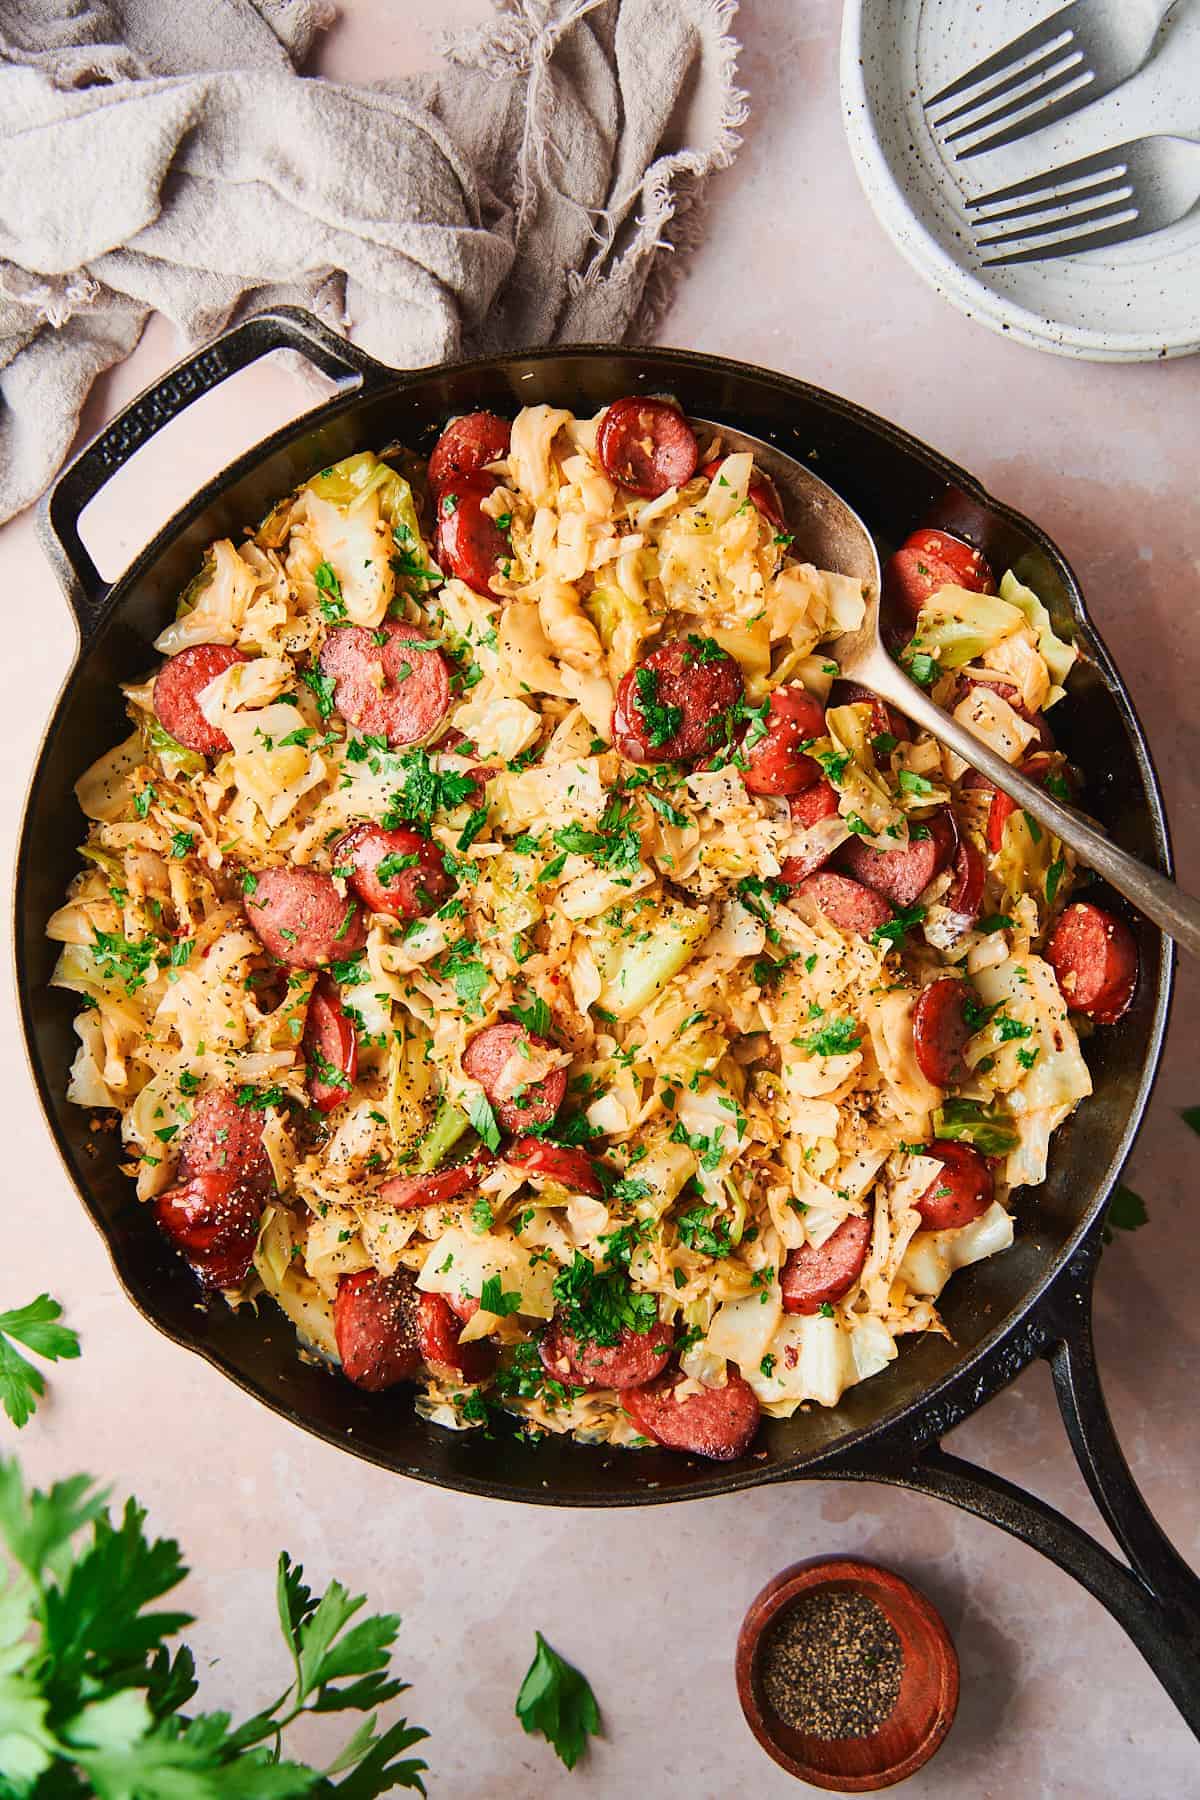 An overhead shot of a skillet filled with cabbage and sausage.